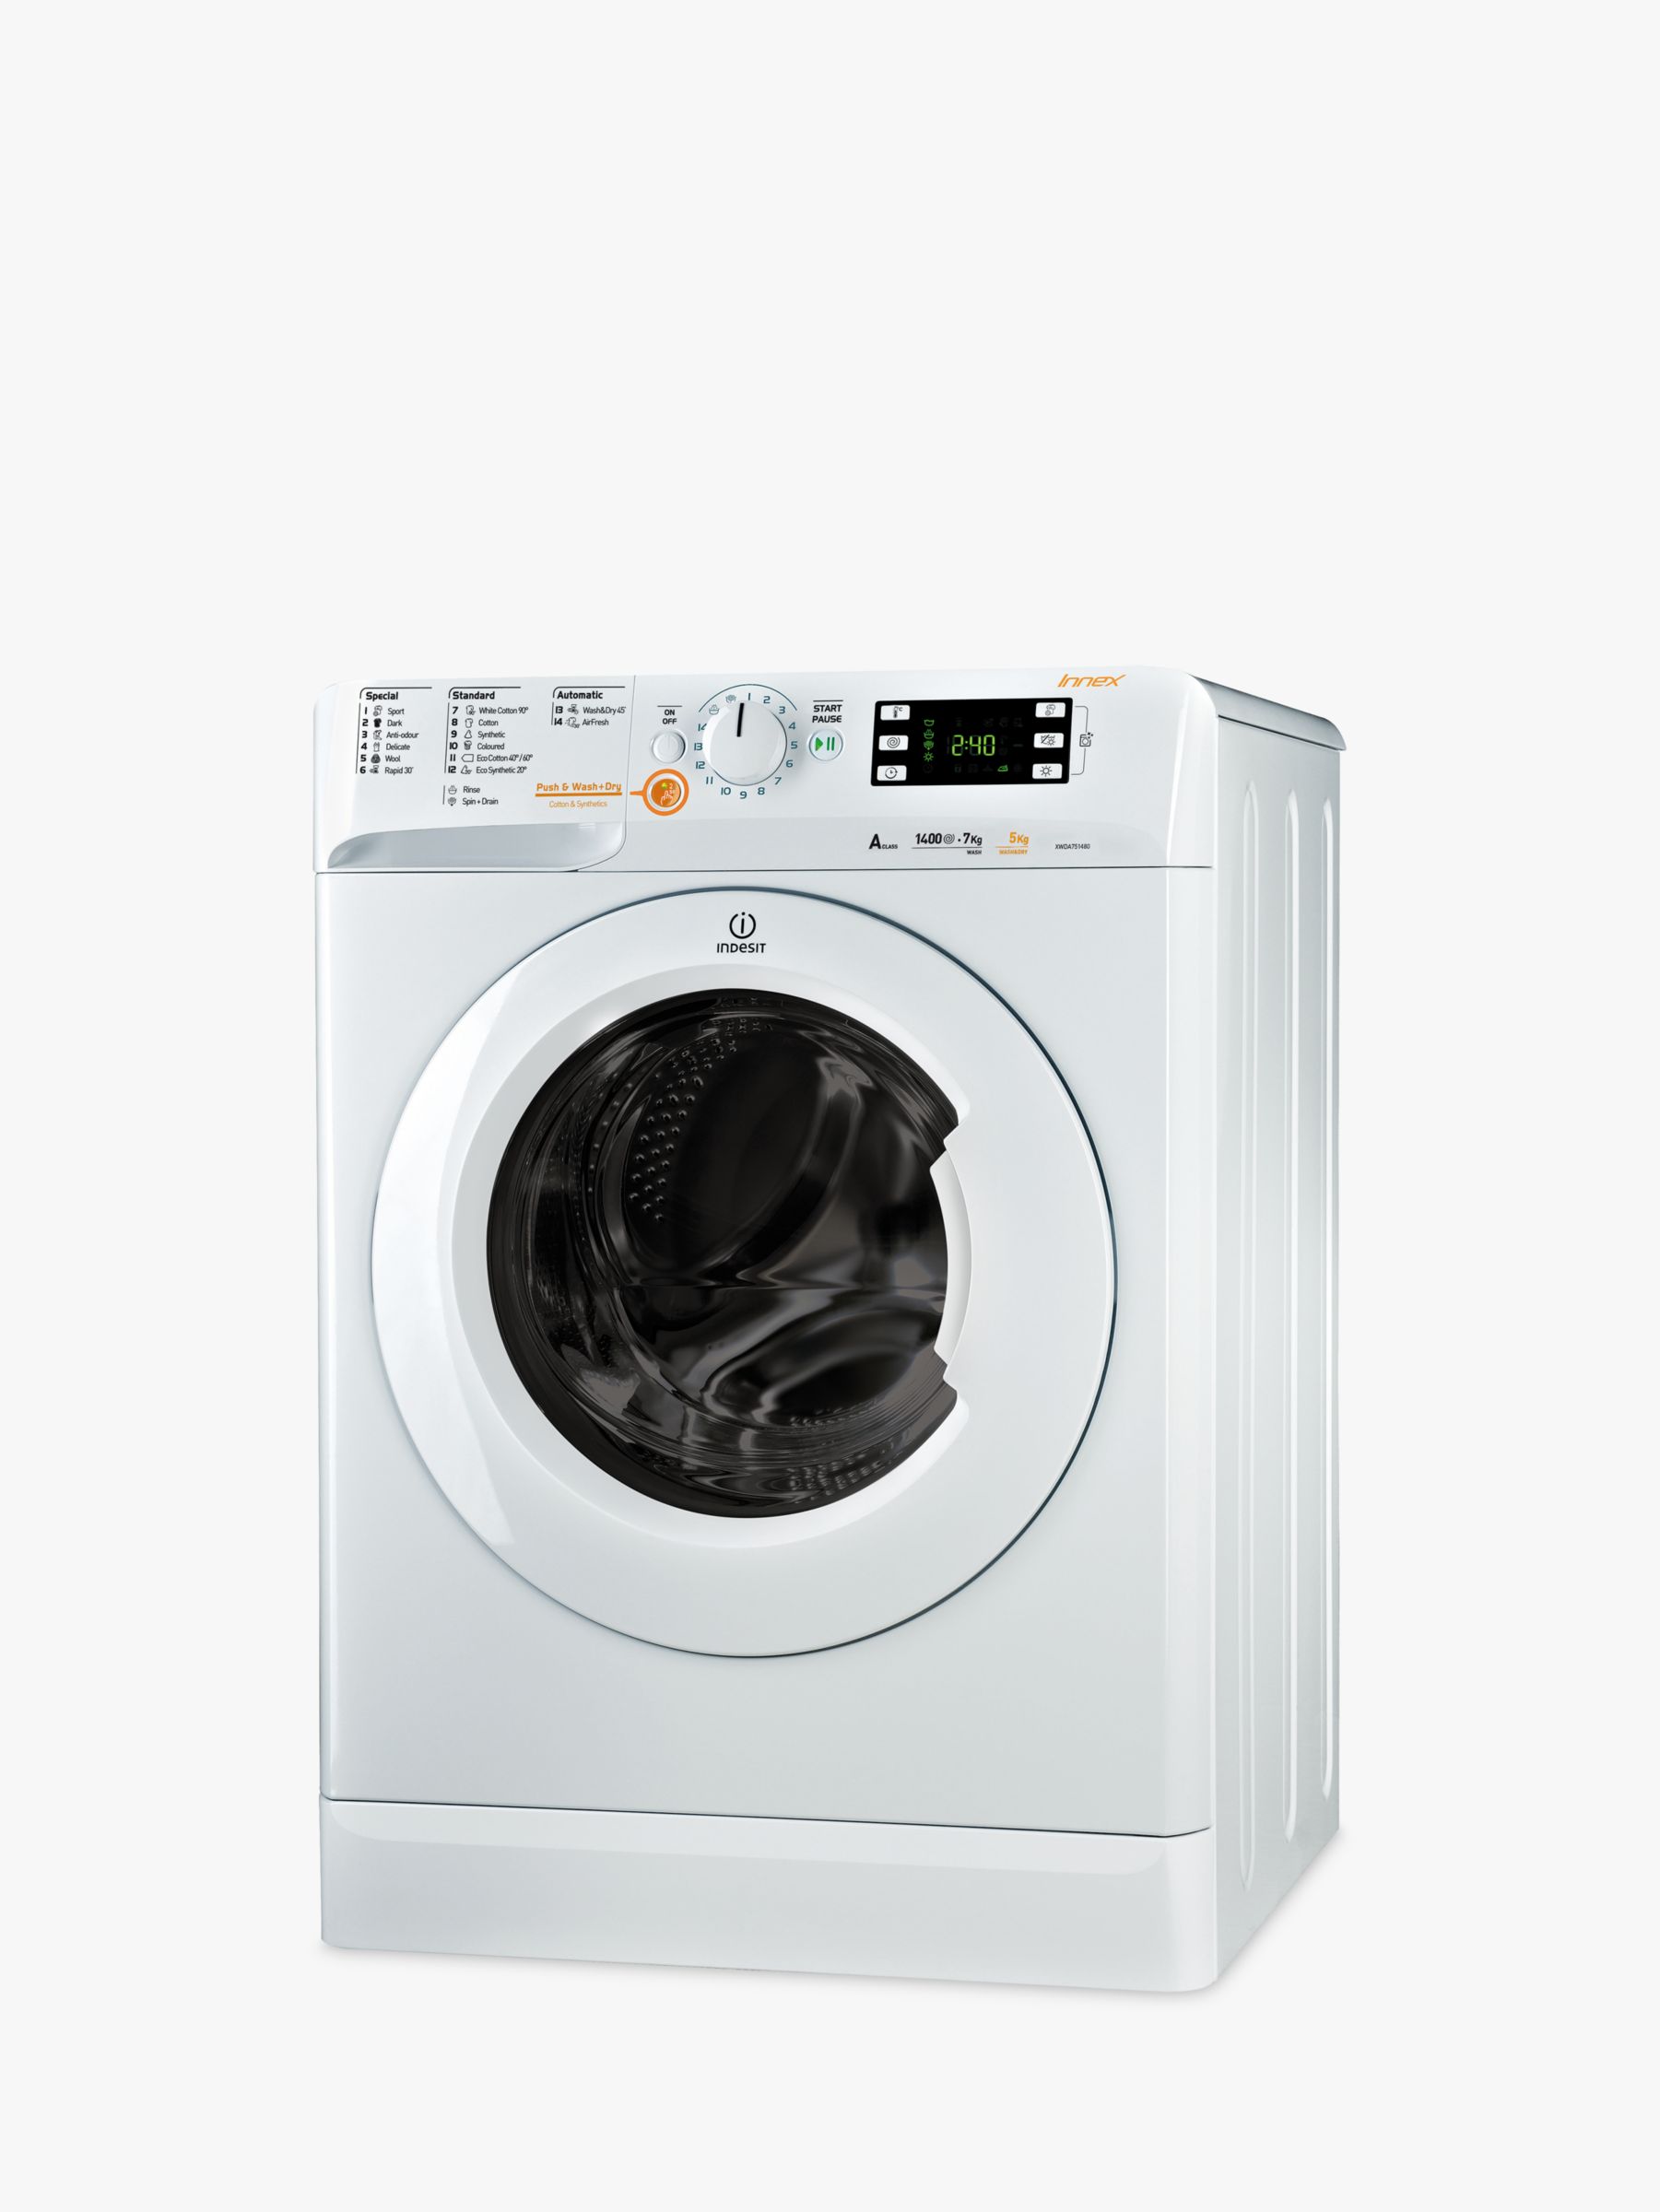 Indesit Innex XWDE751480XW Freestanding Washer Dryer, 7kg Wash/5kg Dry Load, A Energy Rating, 1400rpm Spin, White